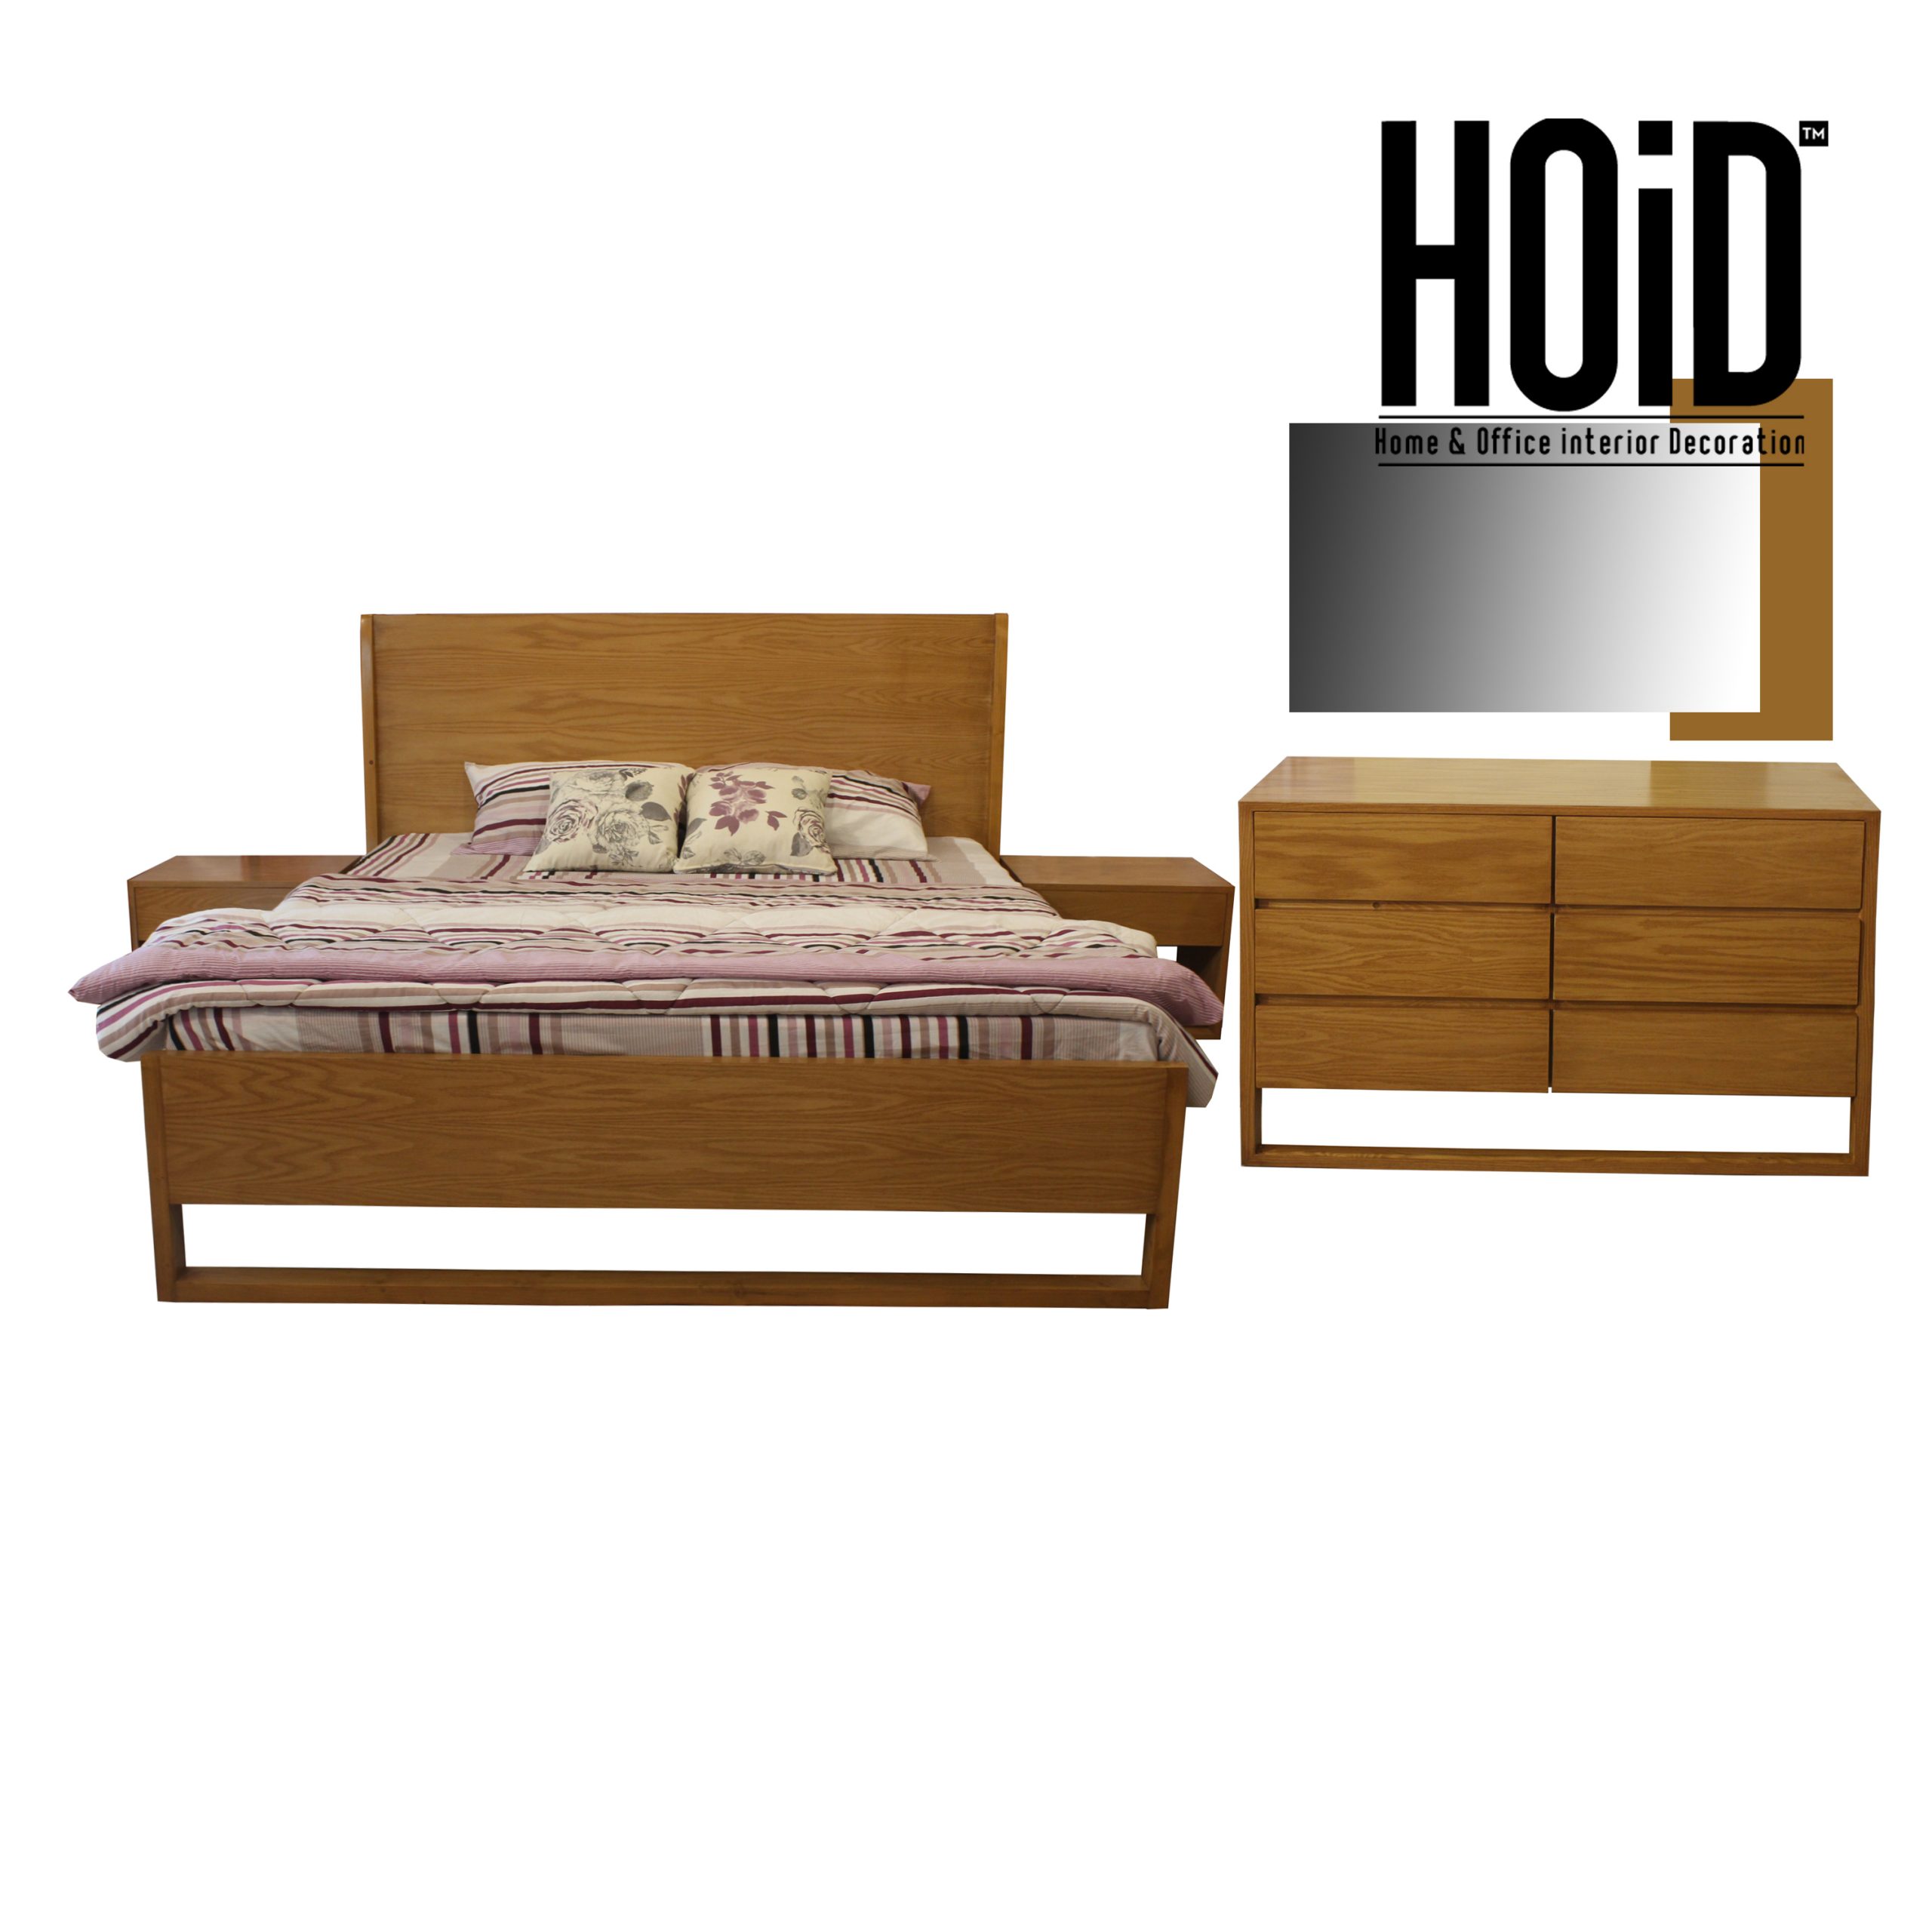 todo-bed-set-scaled-2.jpg